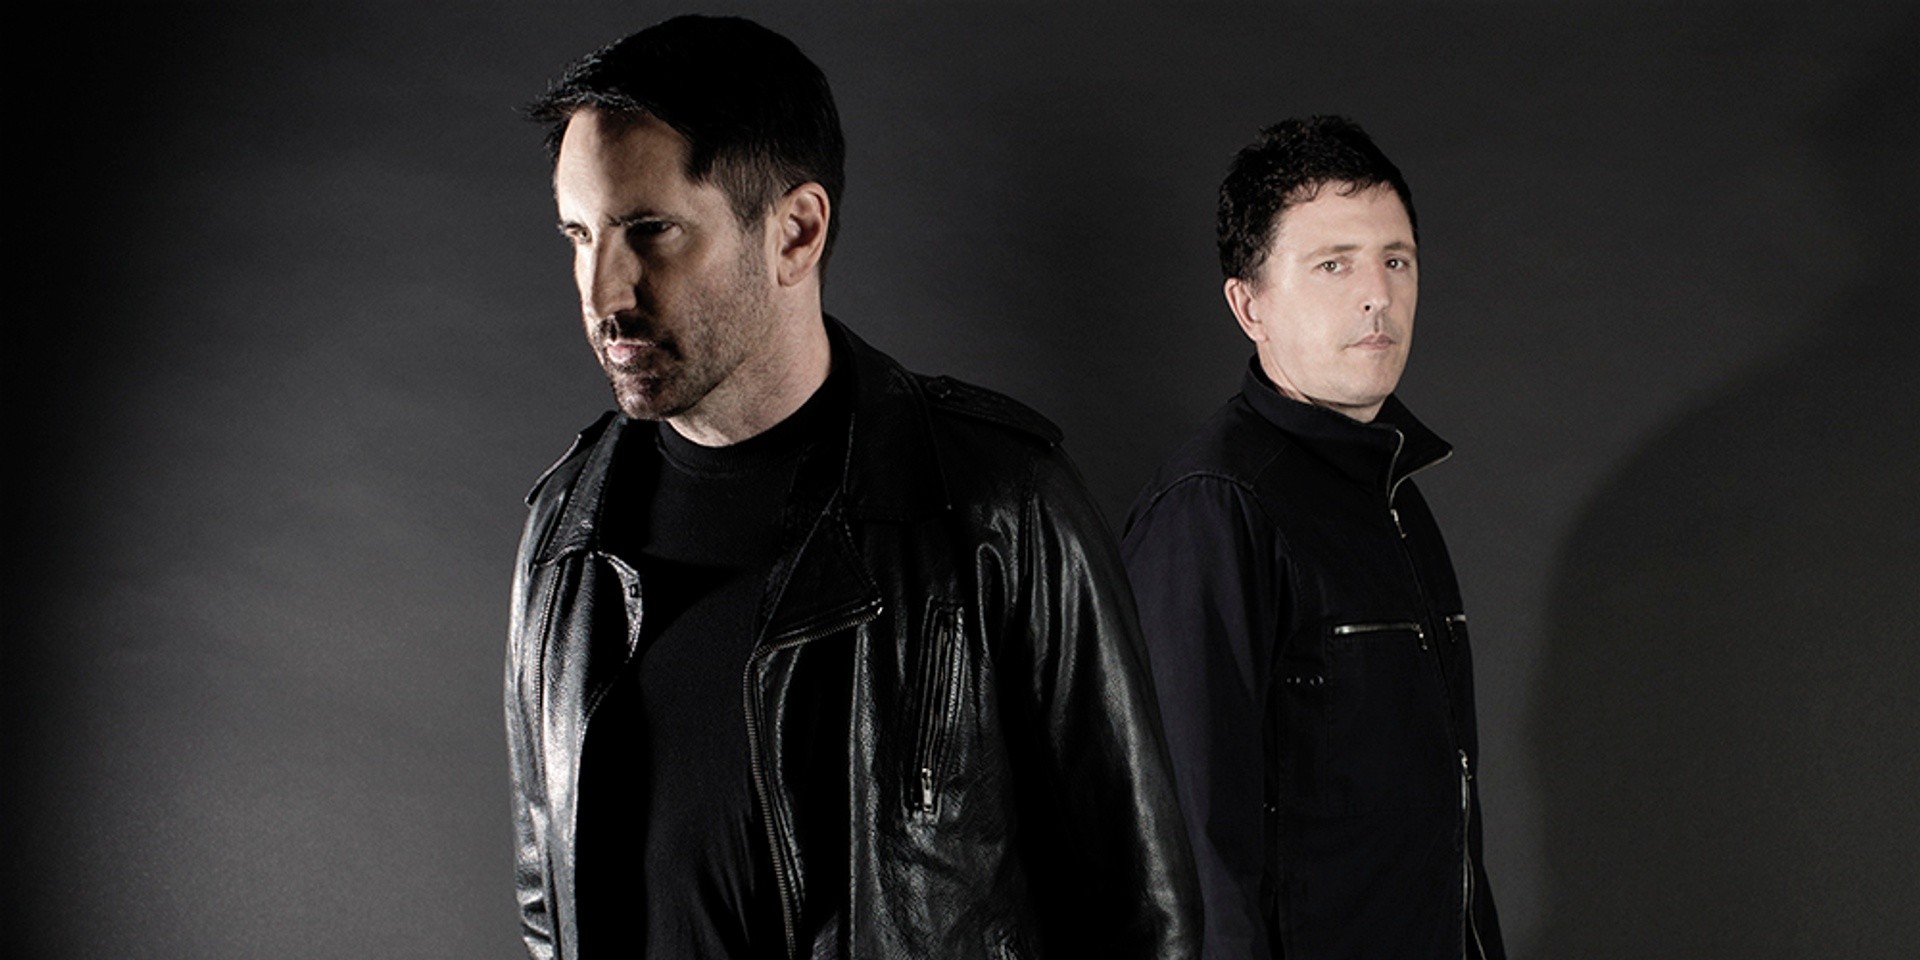 Trailer released for Trent Reznor and Atticus Ross-scored film, Waves